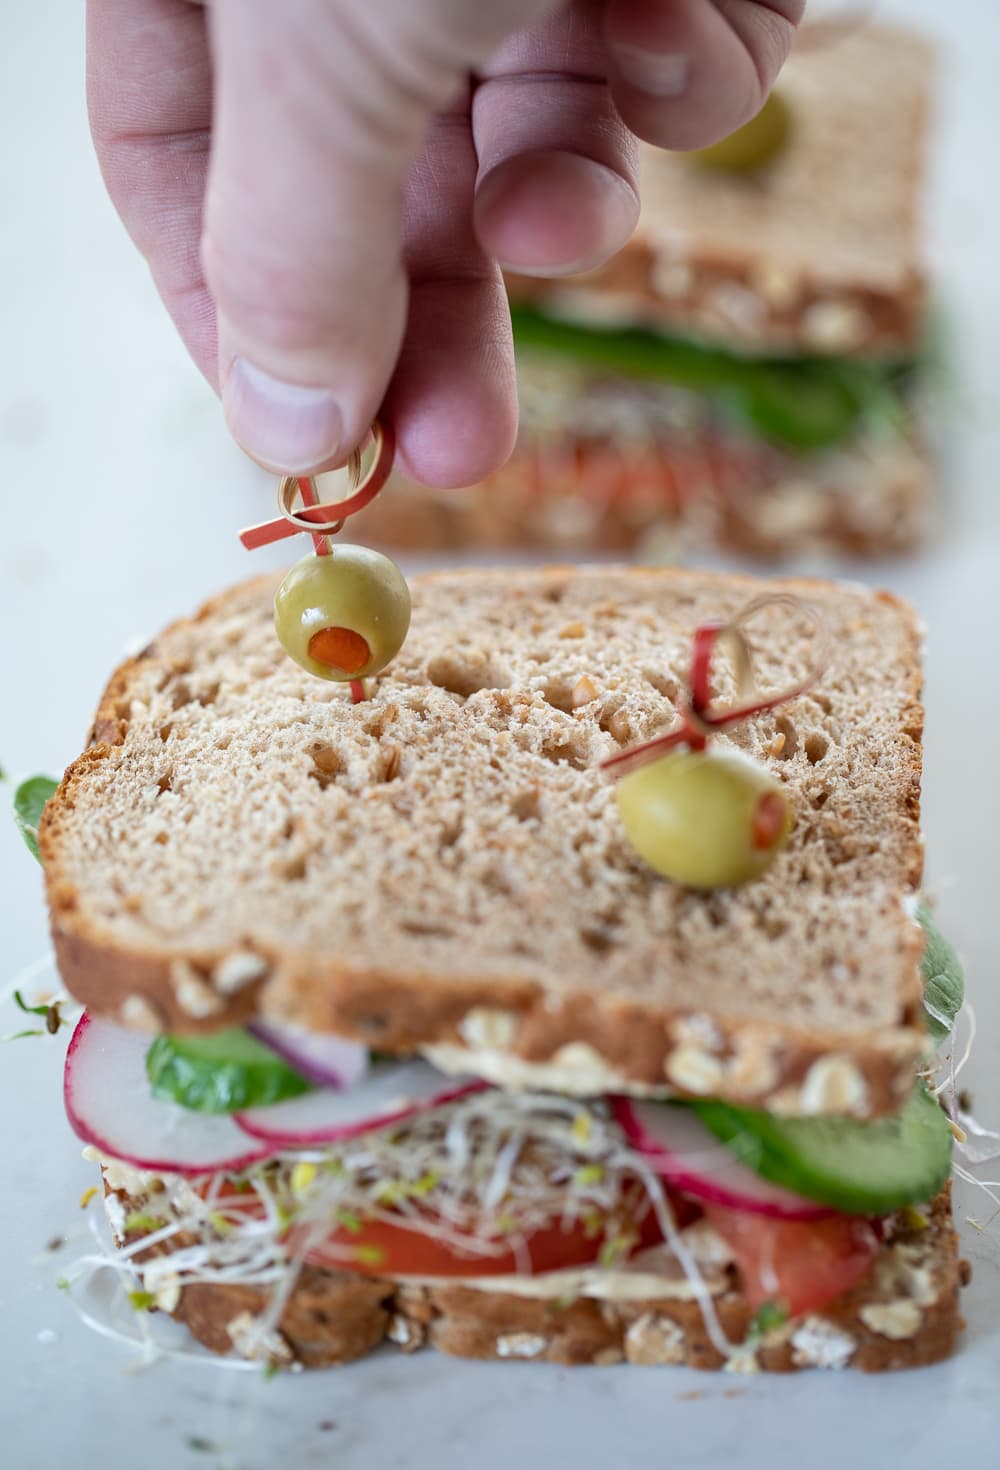 hand putting olive and toothpick into hummus sandwich.